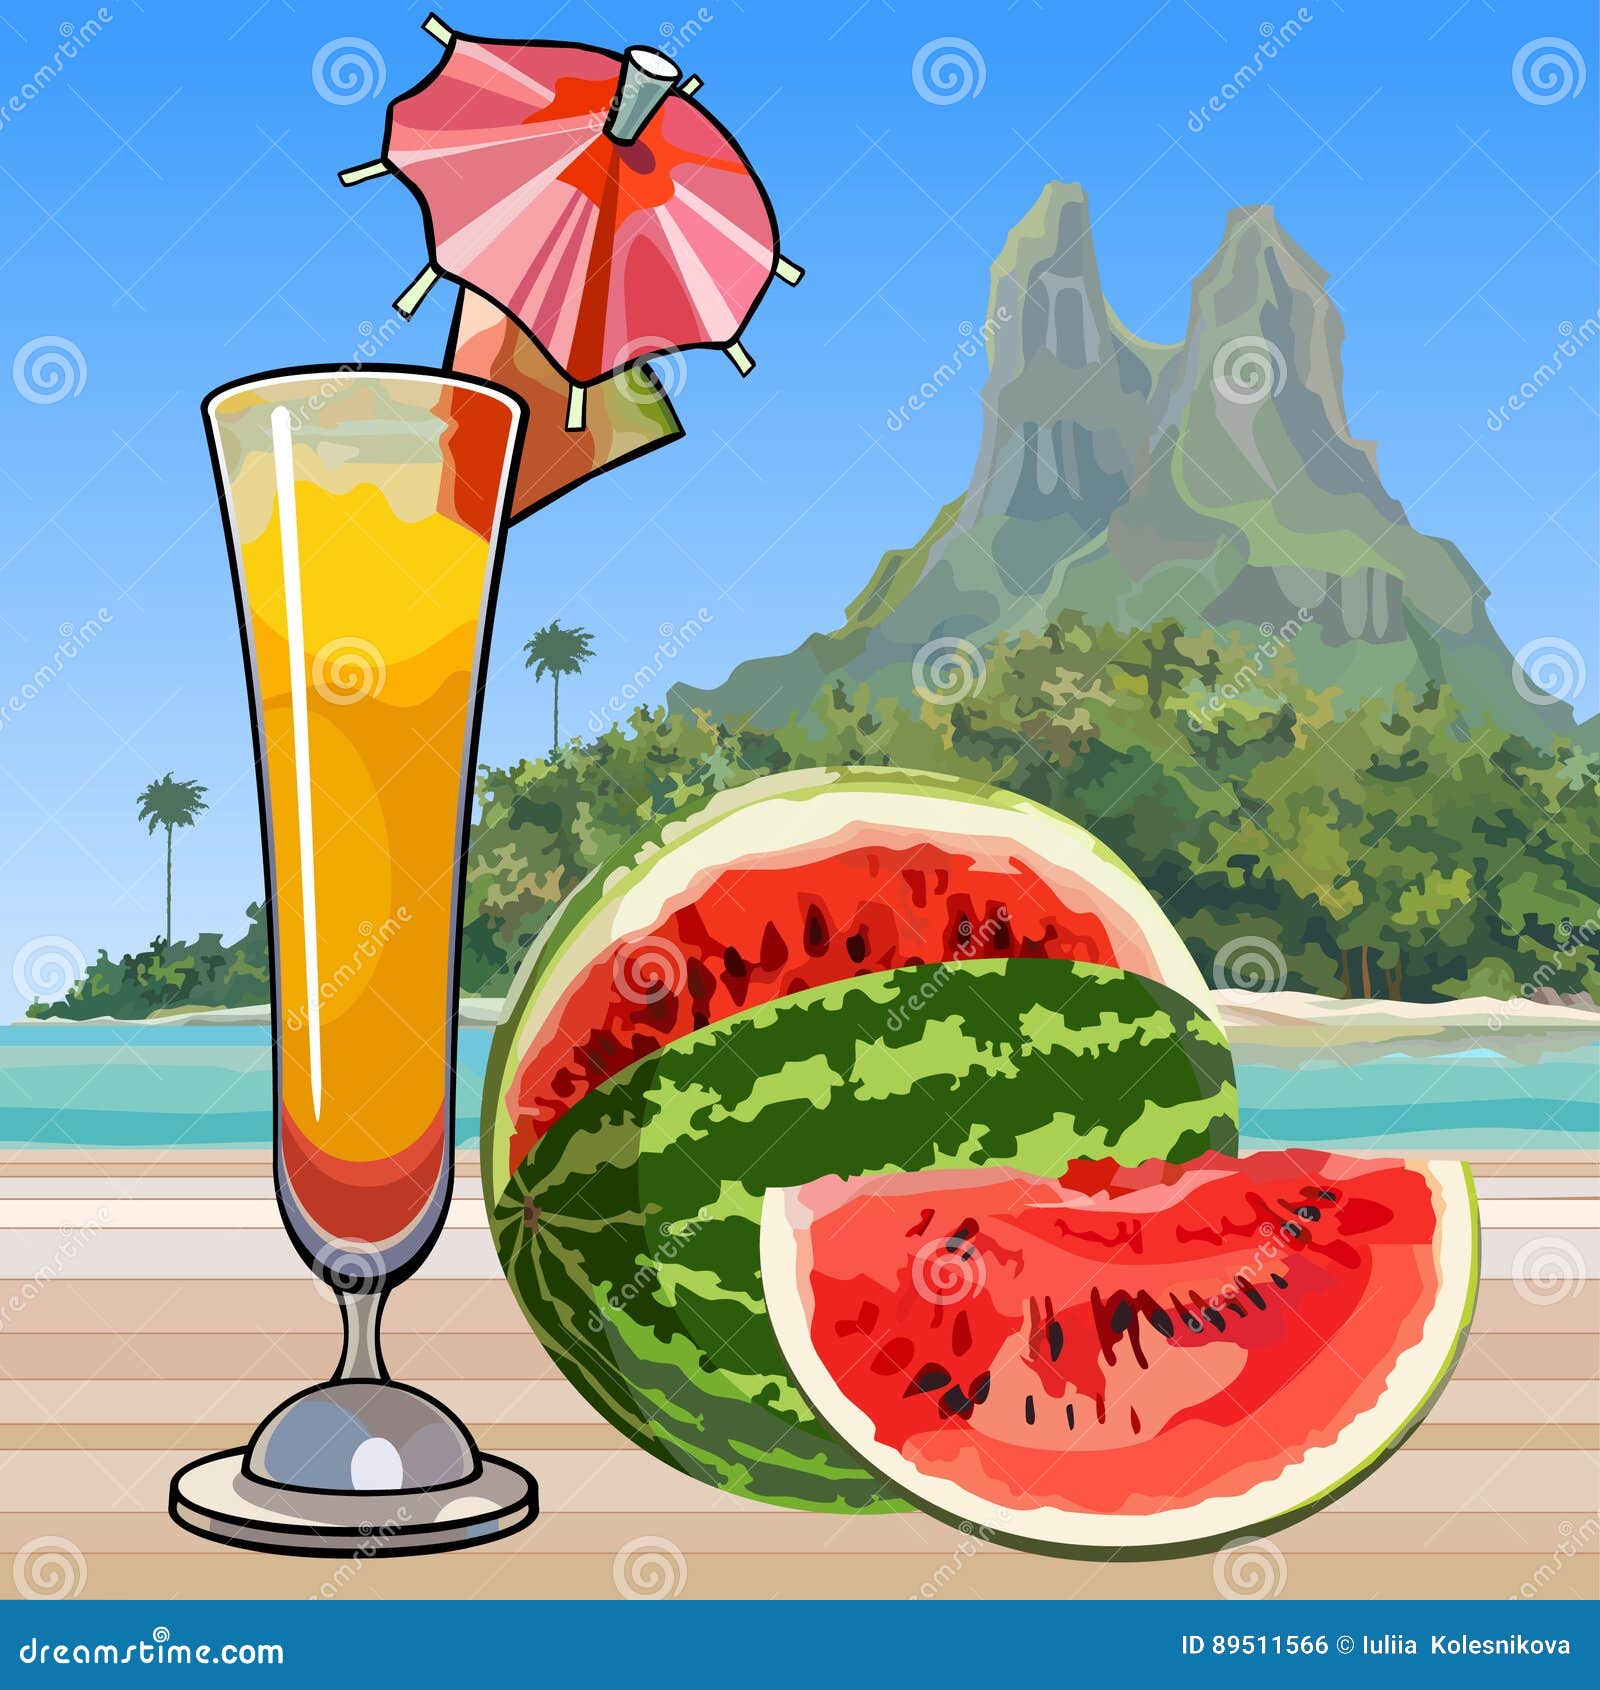 drawn wine glass with a cocktail and watermelon in the tropics